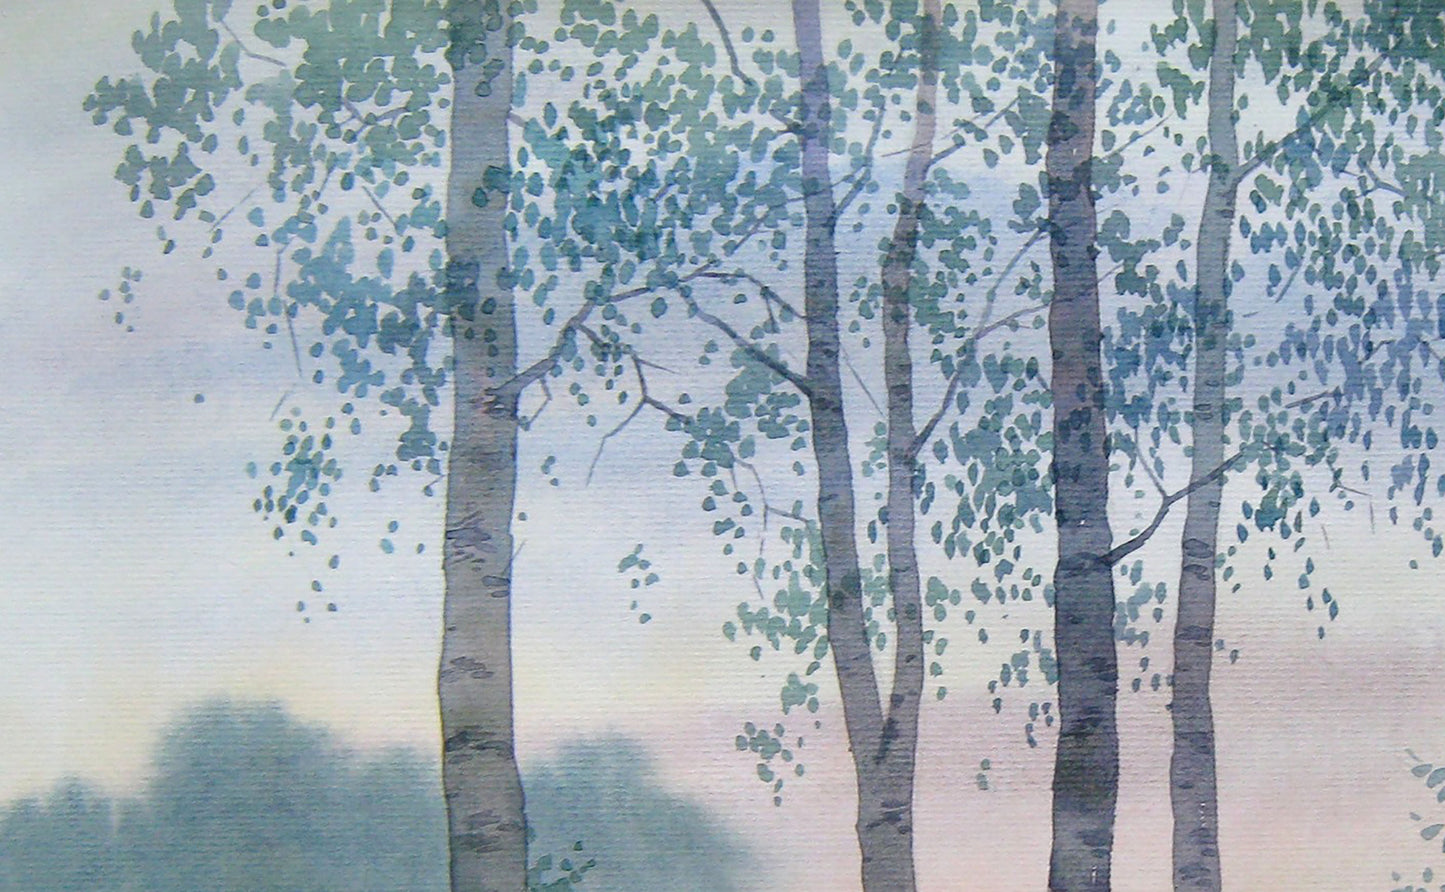 Valery Savenets' watercolor artwork portraying "Birches in the Forest"